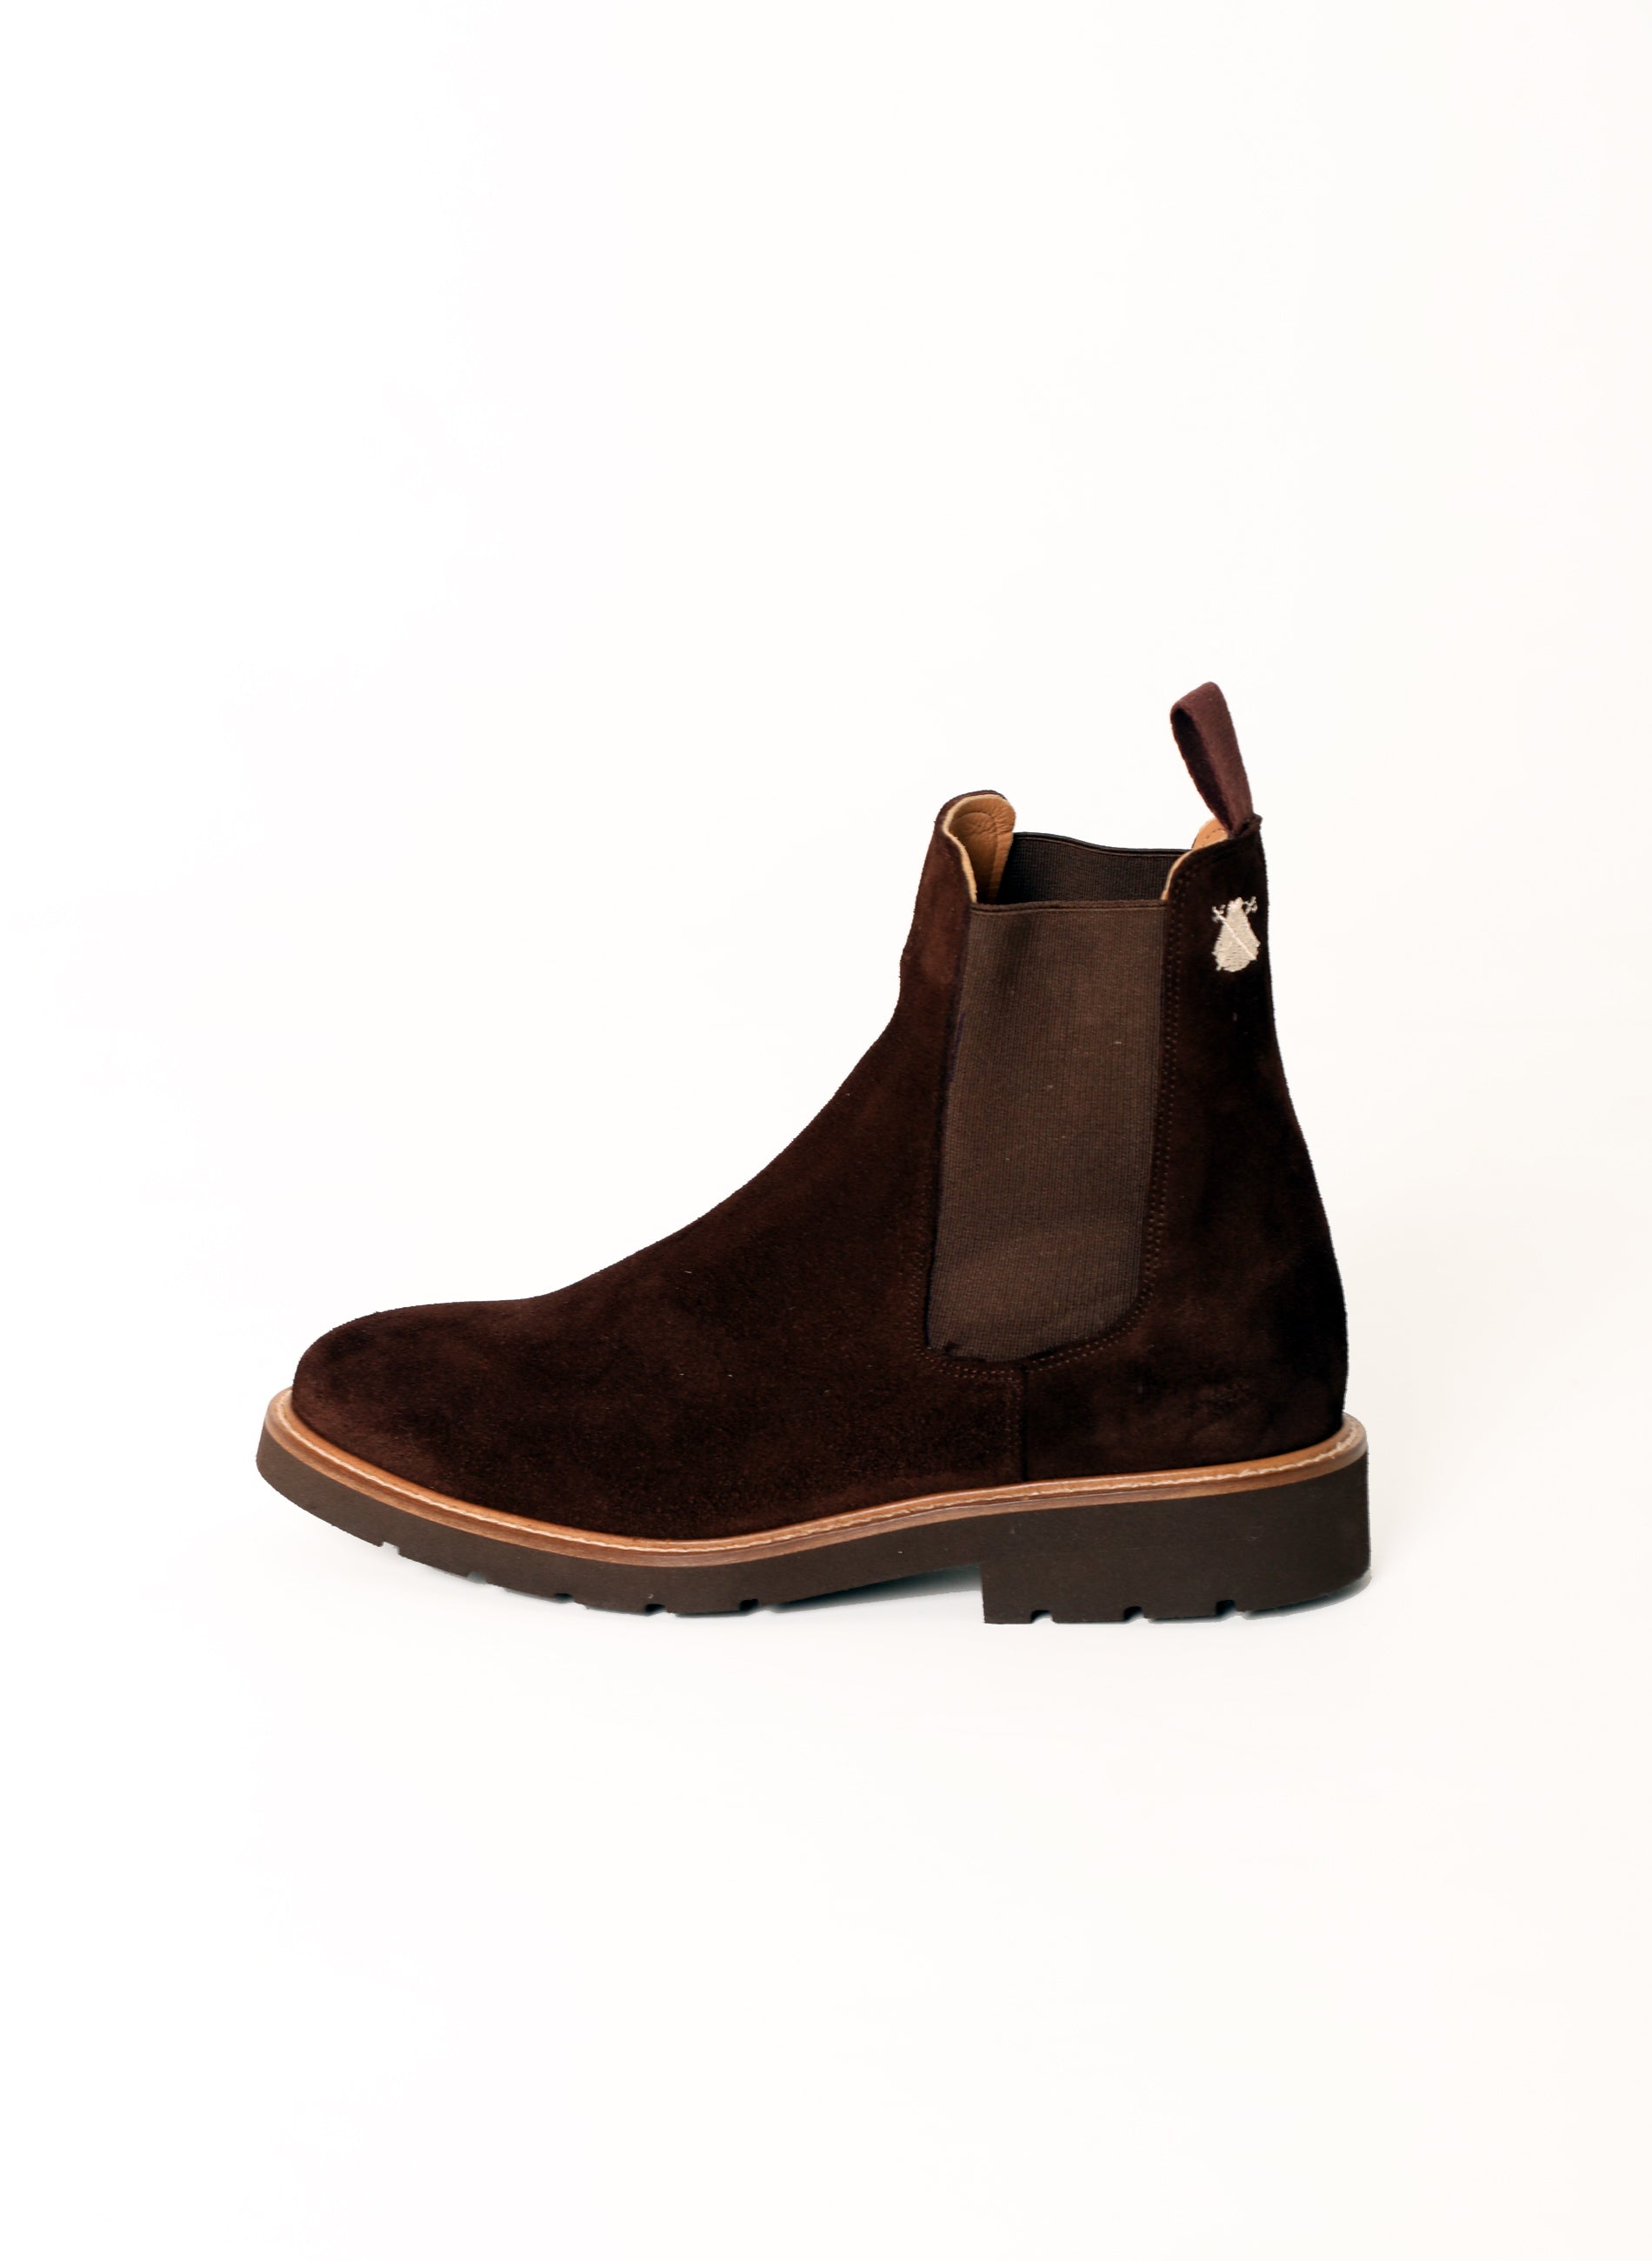 Women's Brown Suede Ankle Boots Eva Sole